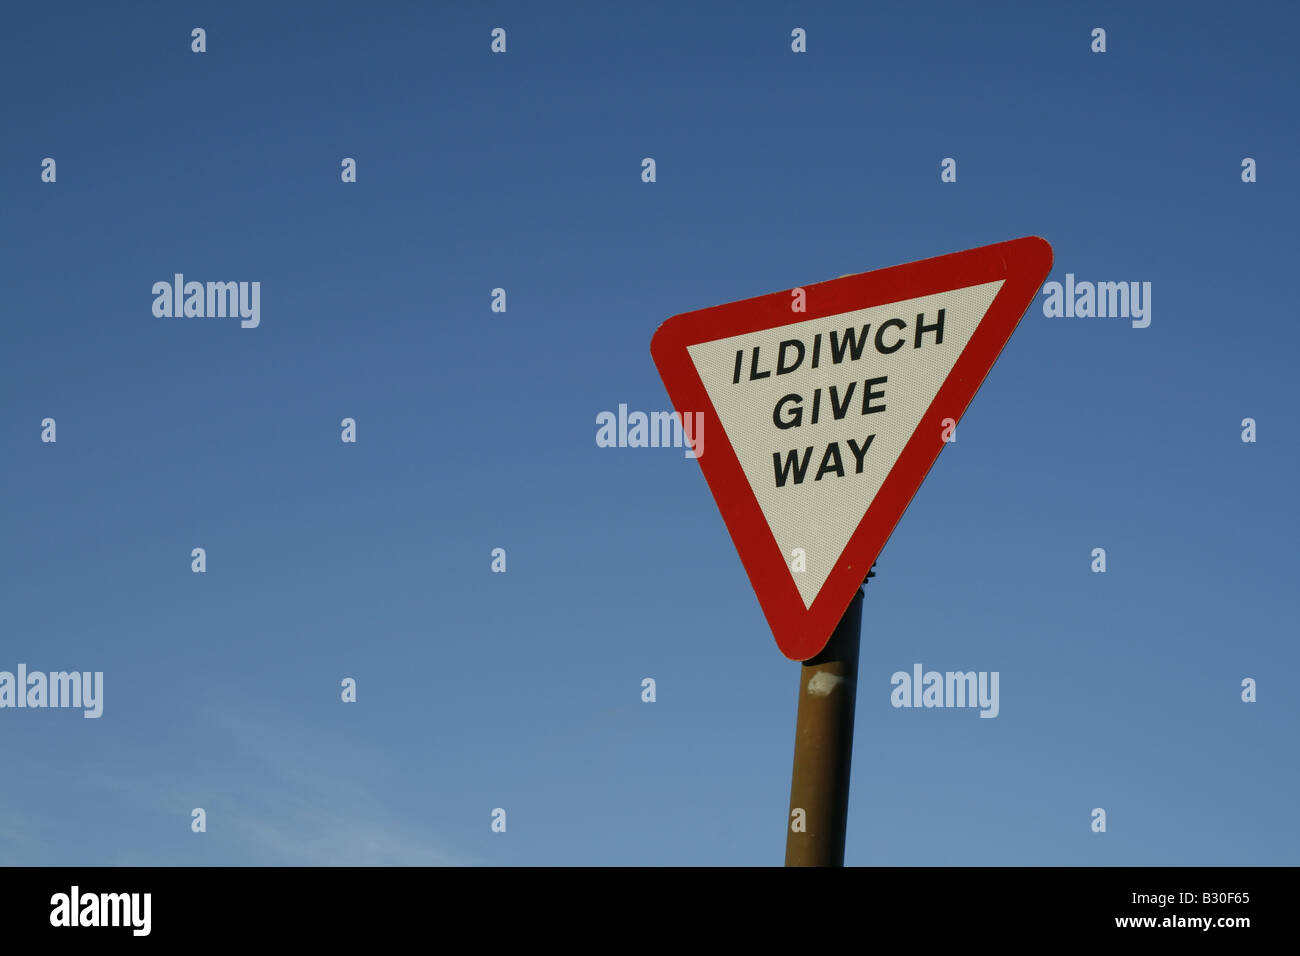 bilingual welsh english give way sign in wales, uk Stock Photo